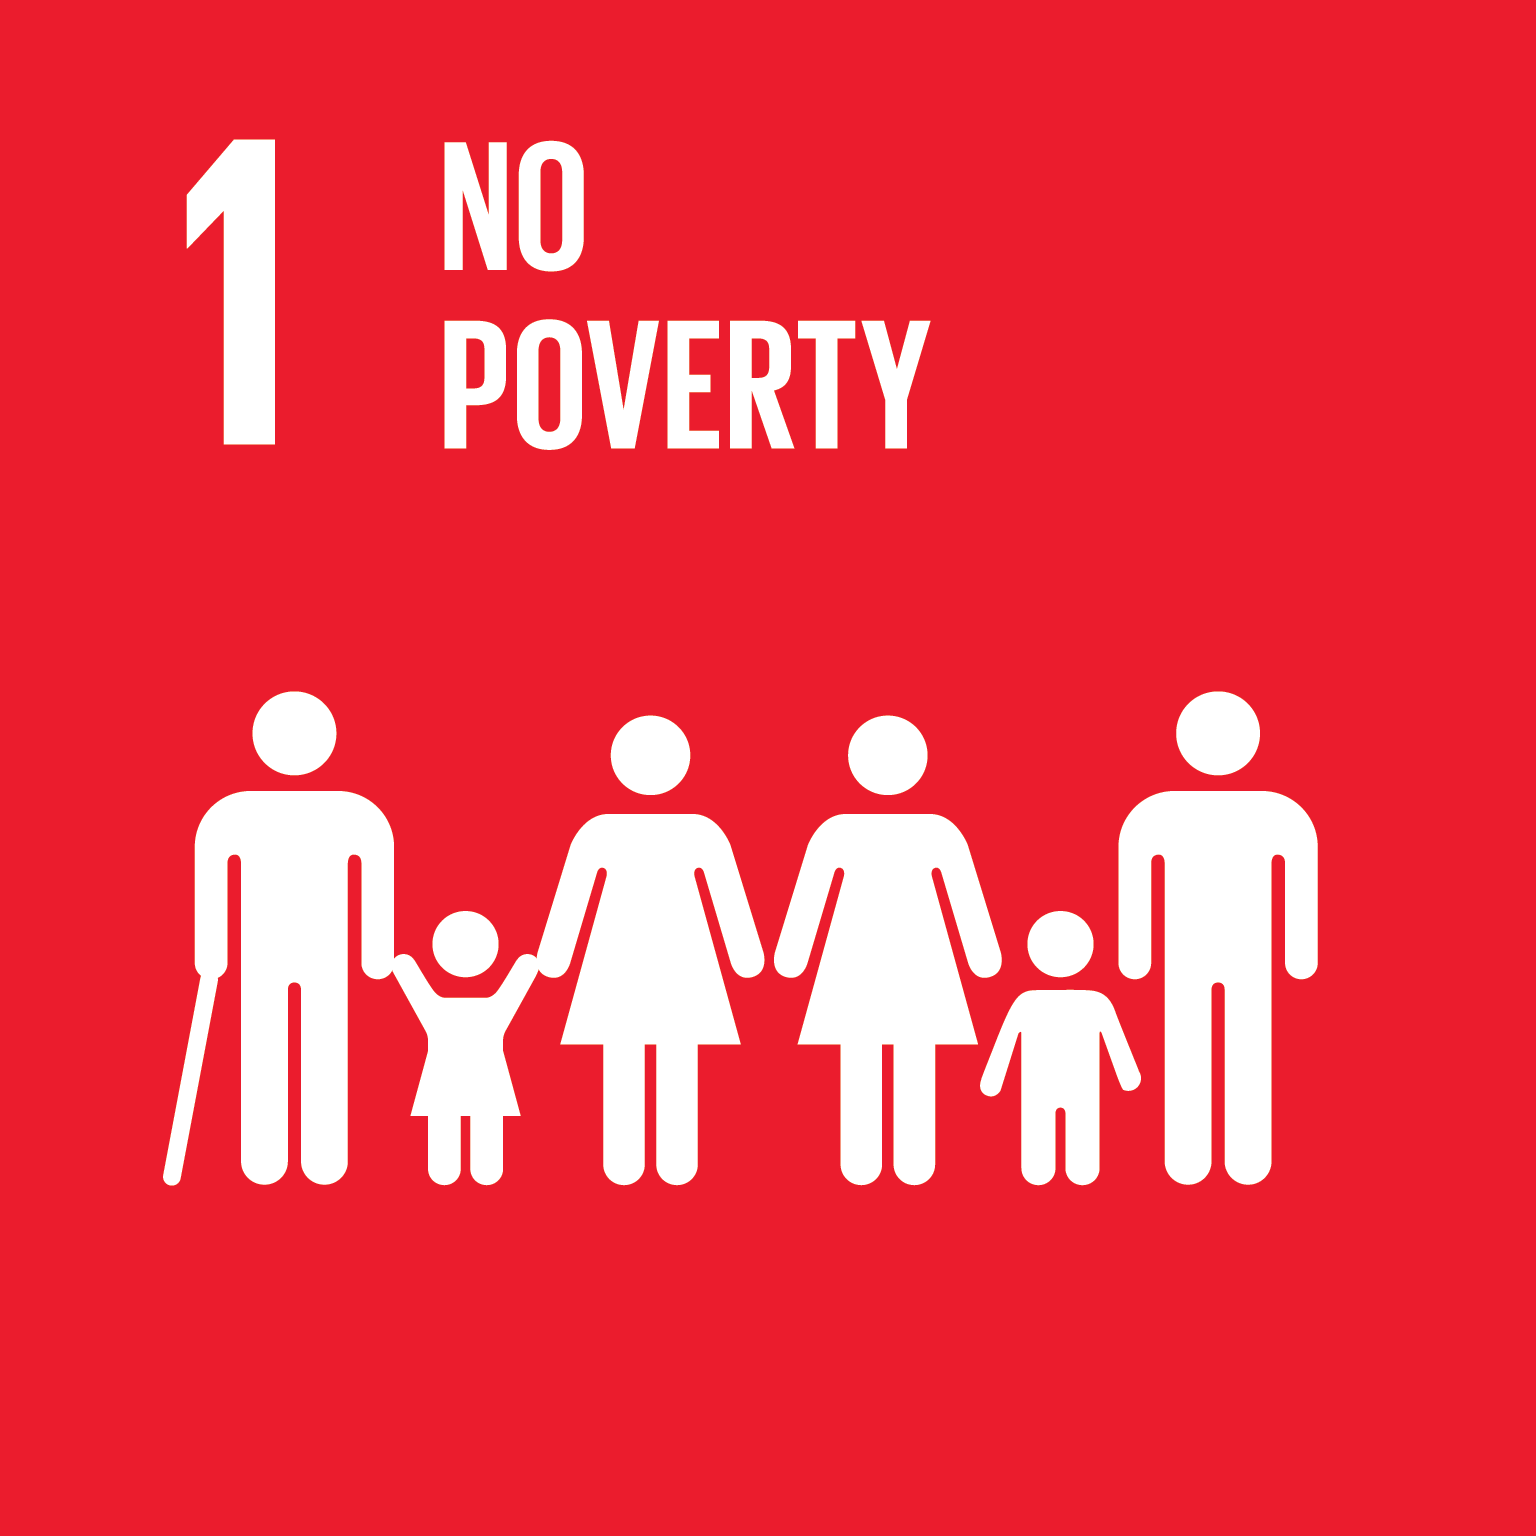 About-Pollinate-Group-Gender-and-Poverty-Nexus-Leave-Poverty-Behind-Sustainable-Development-Goals-India-Indoor-Pollution-and-Women-in-Poverty